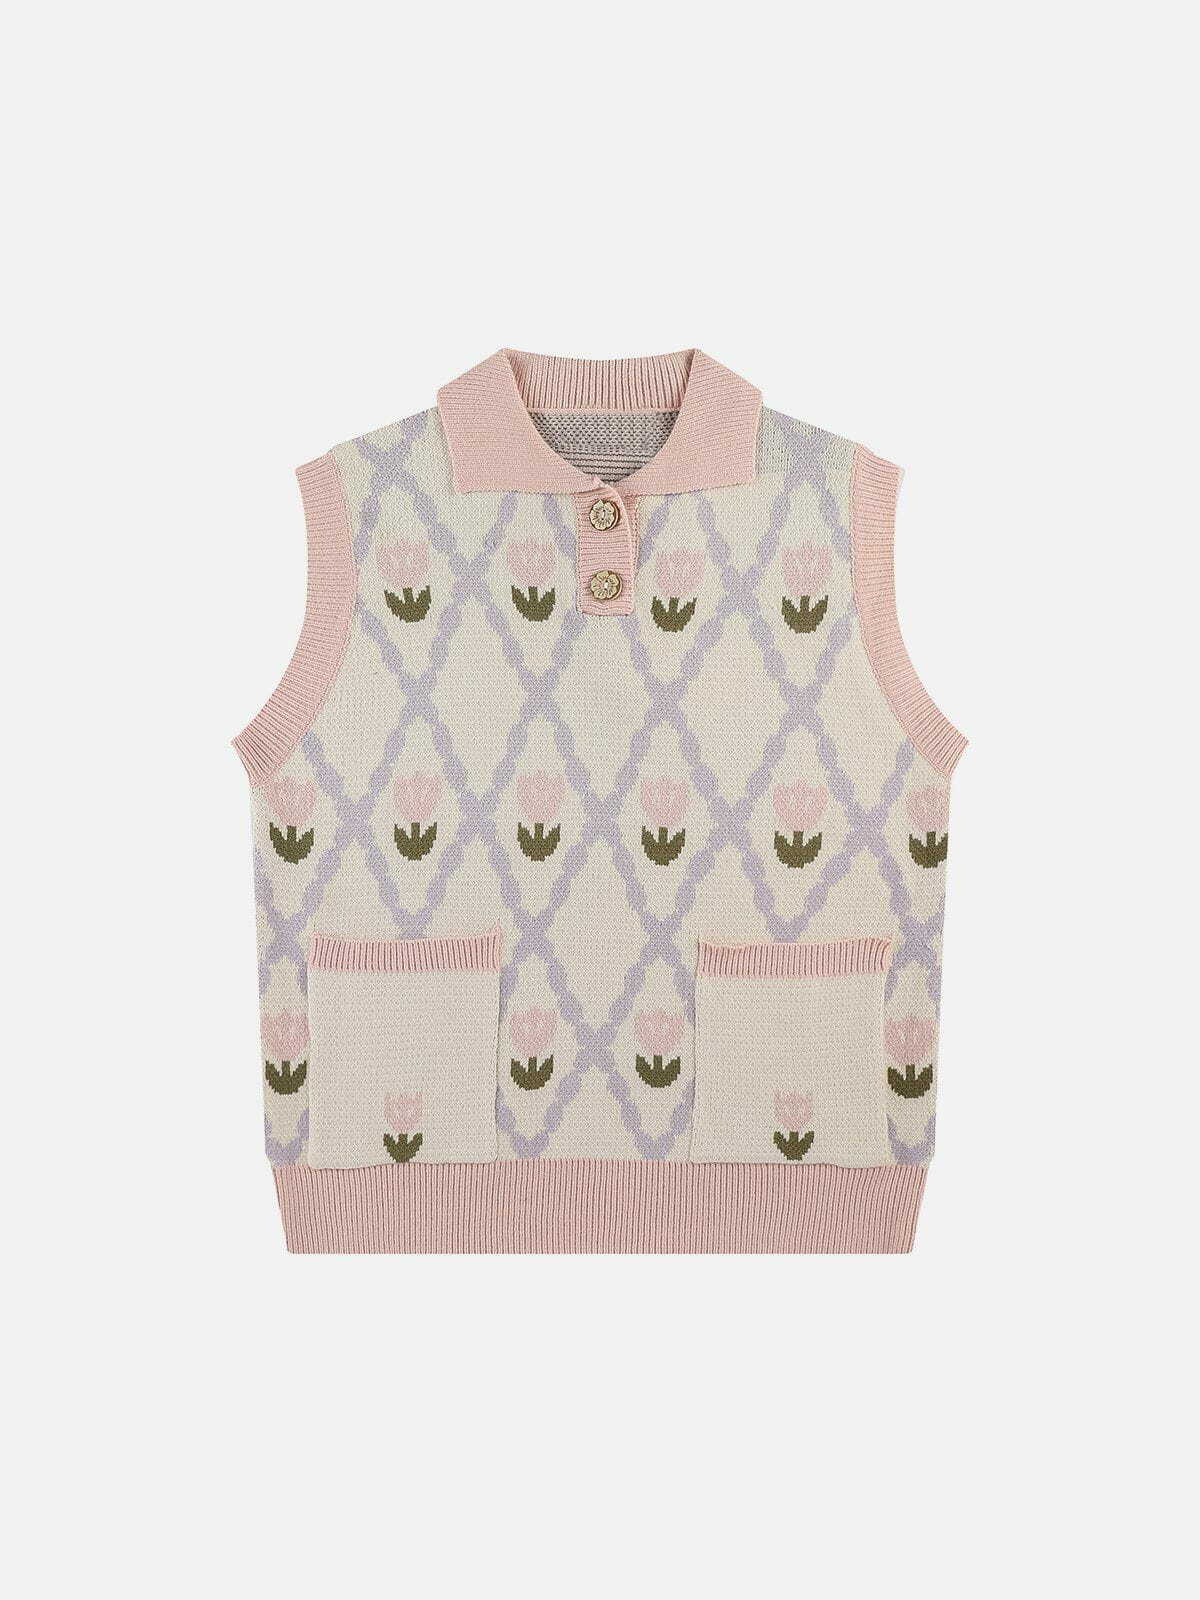 flower embroidery sweater vest quirky floral streetwear elegance 6004